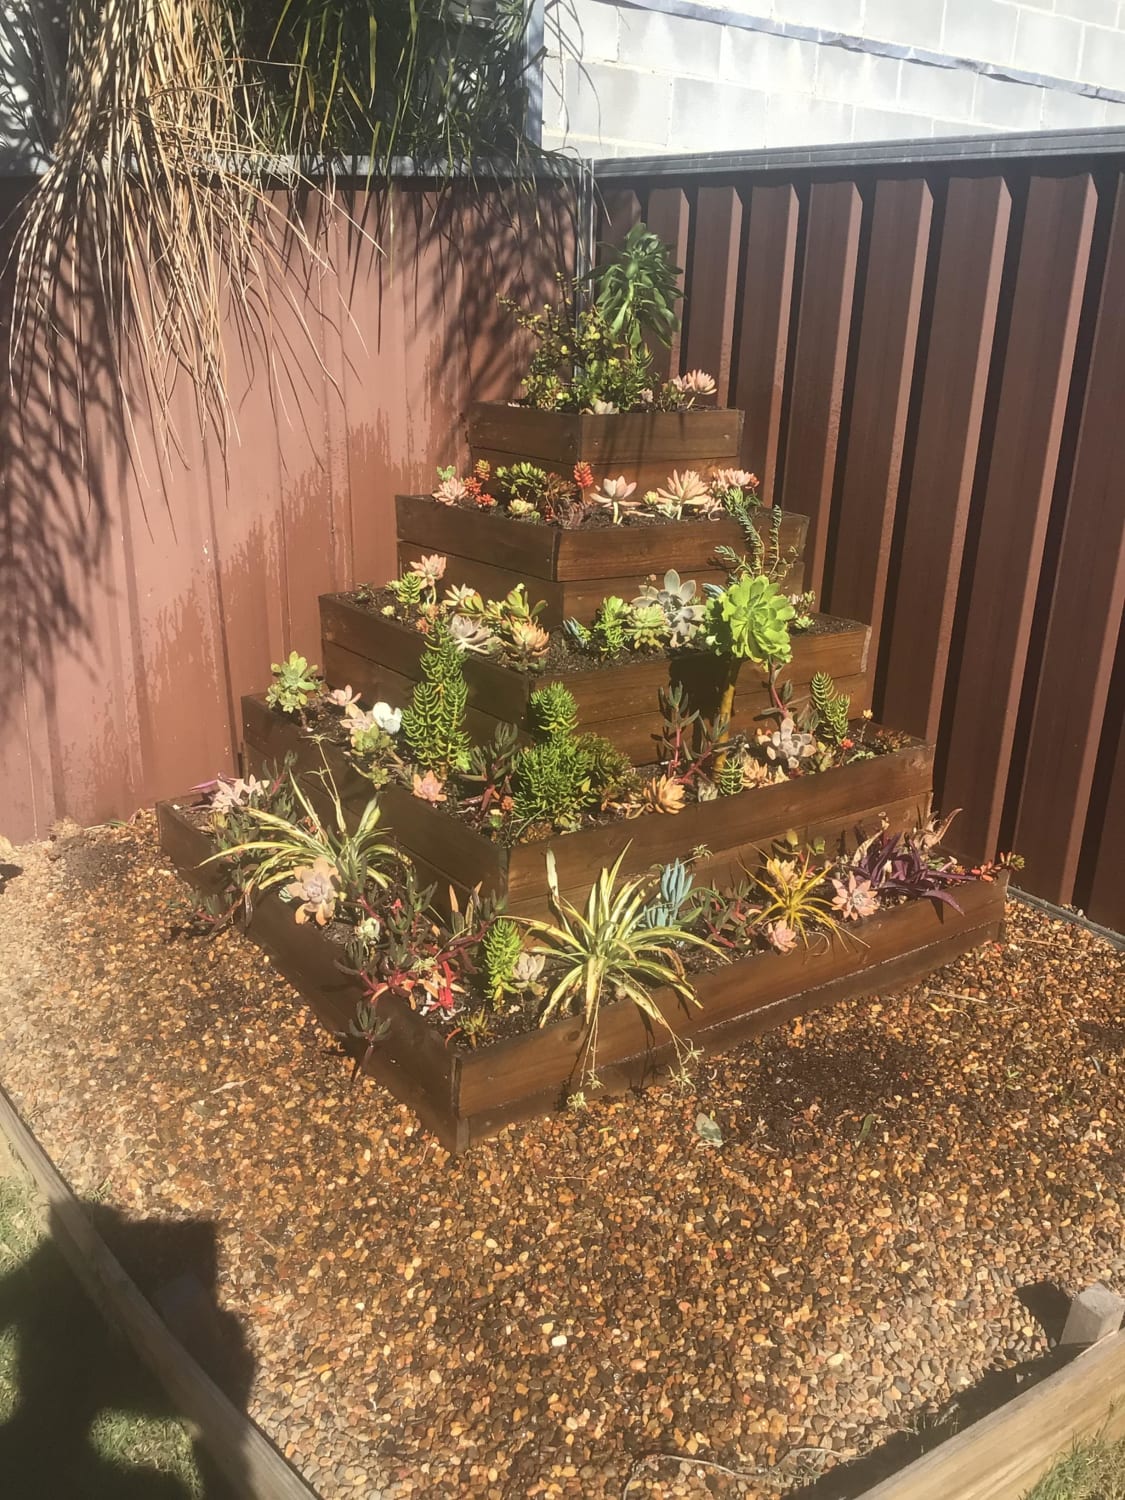 Fixed up some subsidence in my succulent pyramid, tidied up some of the plants….then gave them a nice shower! Looking forward to the spring now (Southern Hemisphere here)